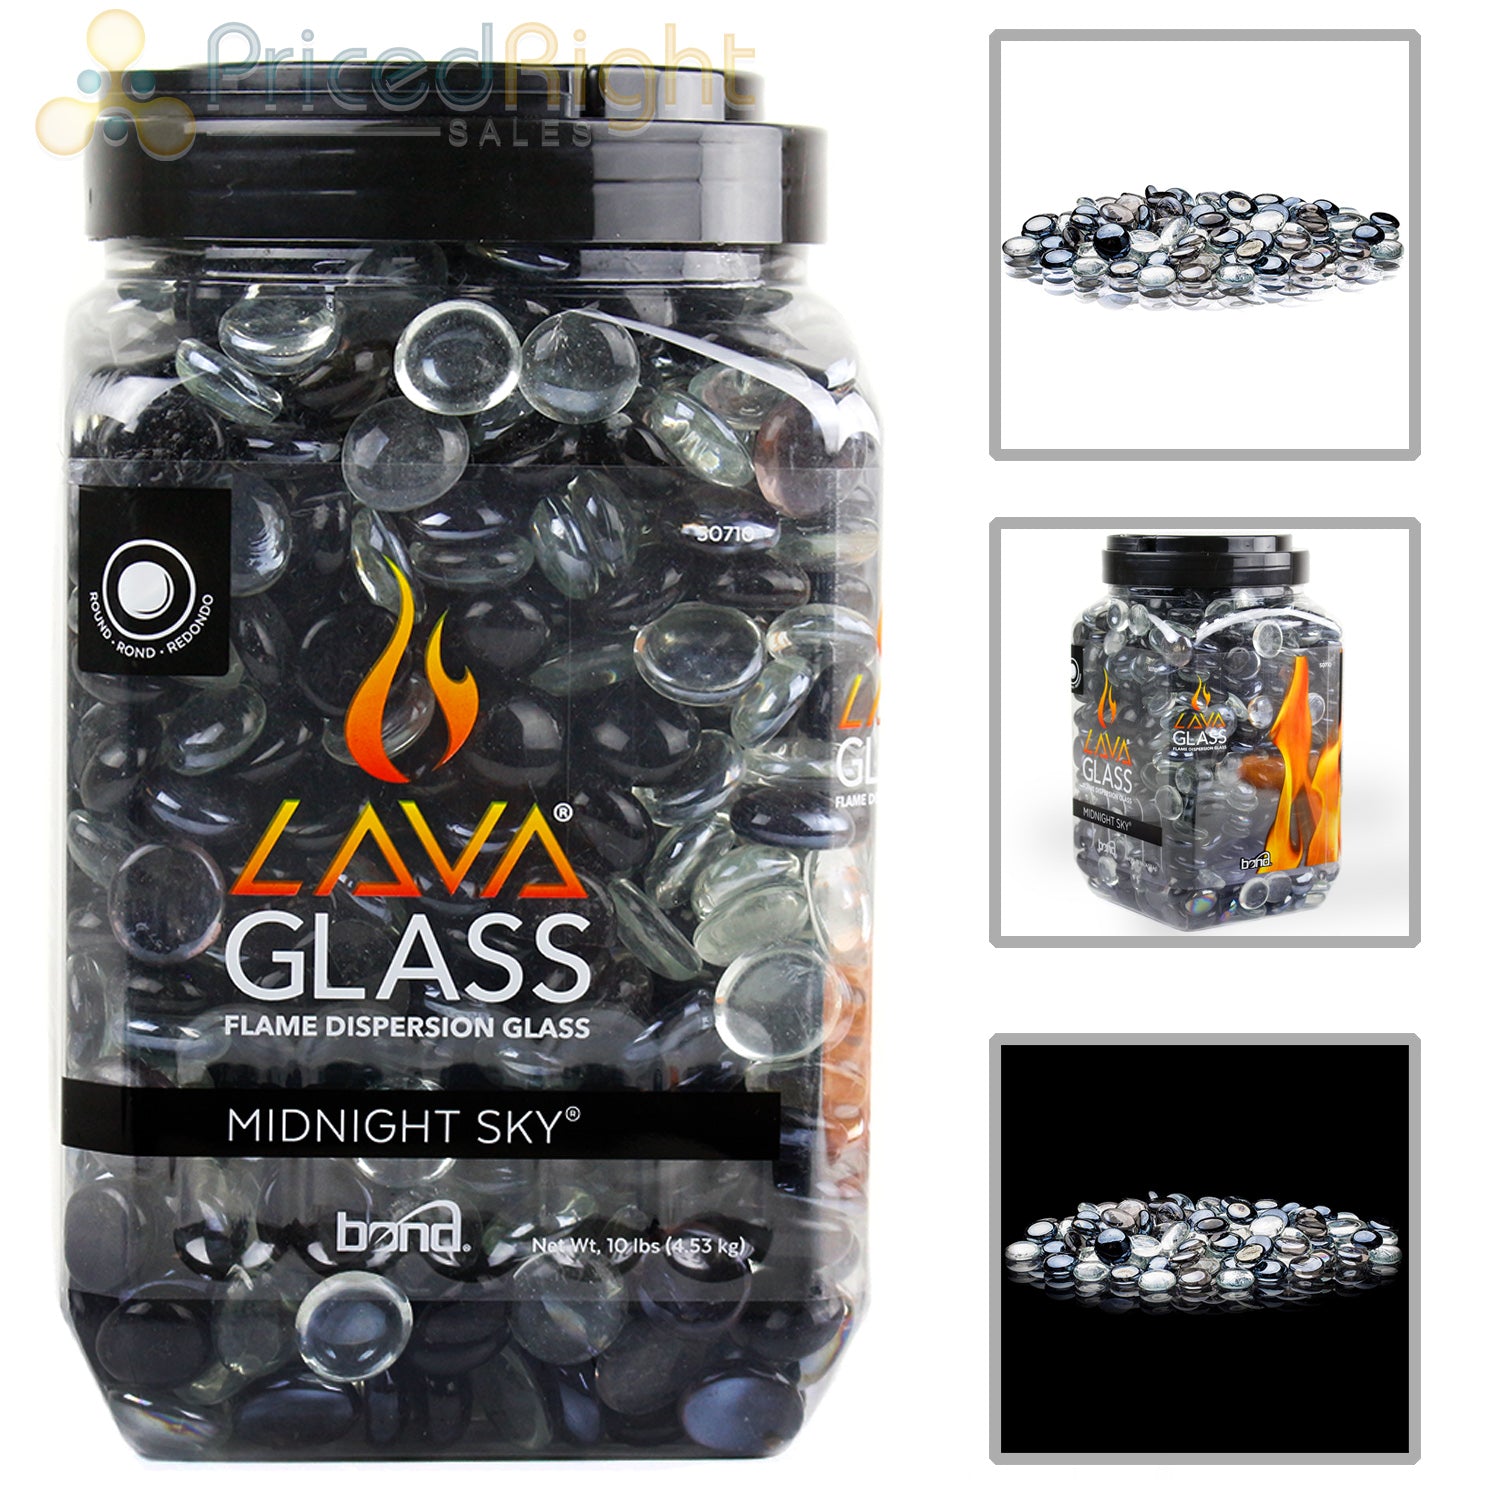 Midnight Sky Round Cut LavaGlass Firepit Dispersion Glass Gas Fireplace 10 lbs